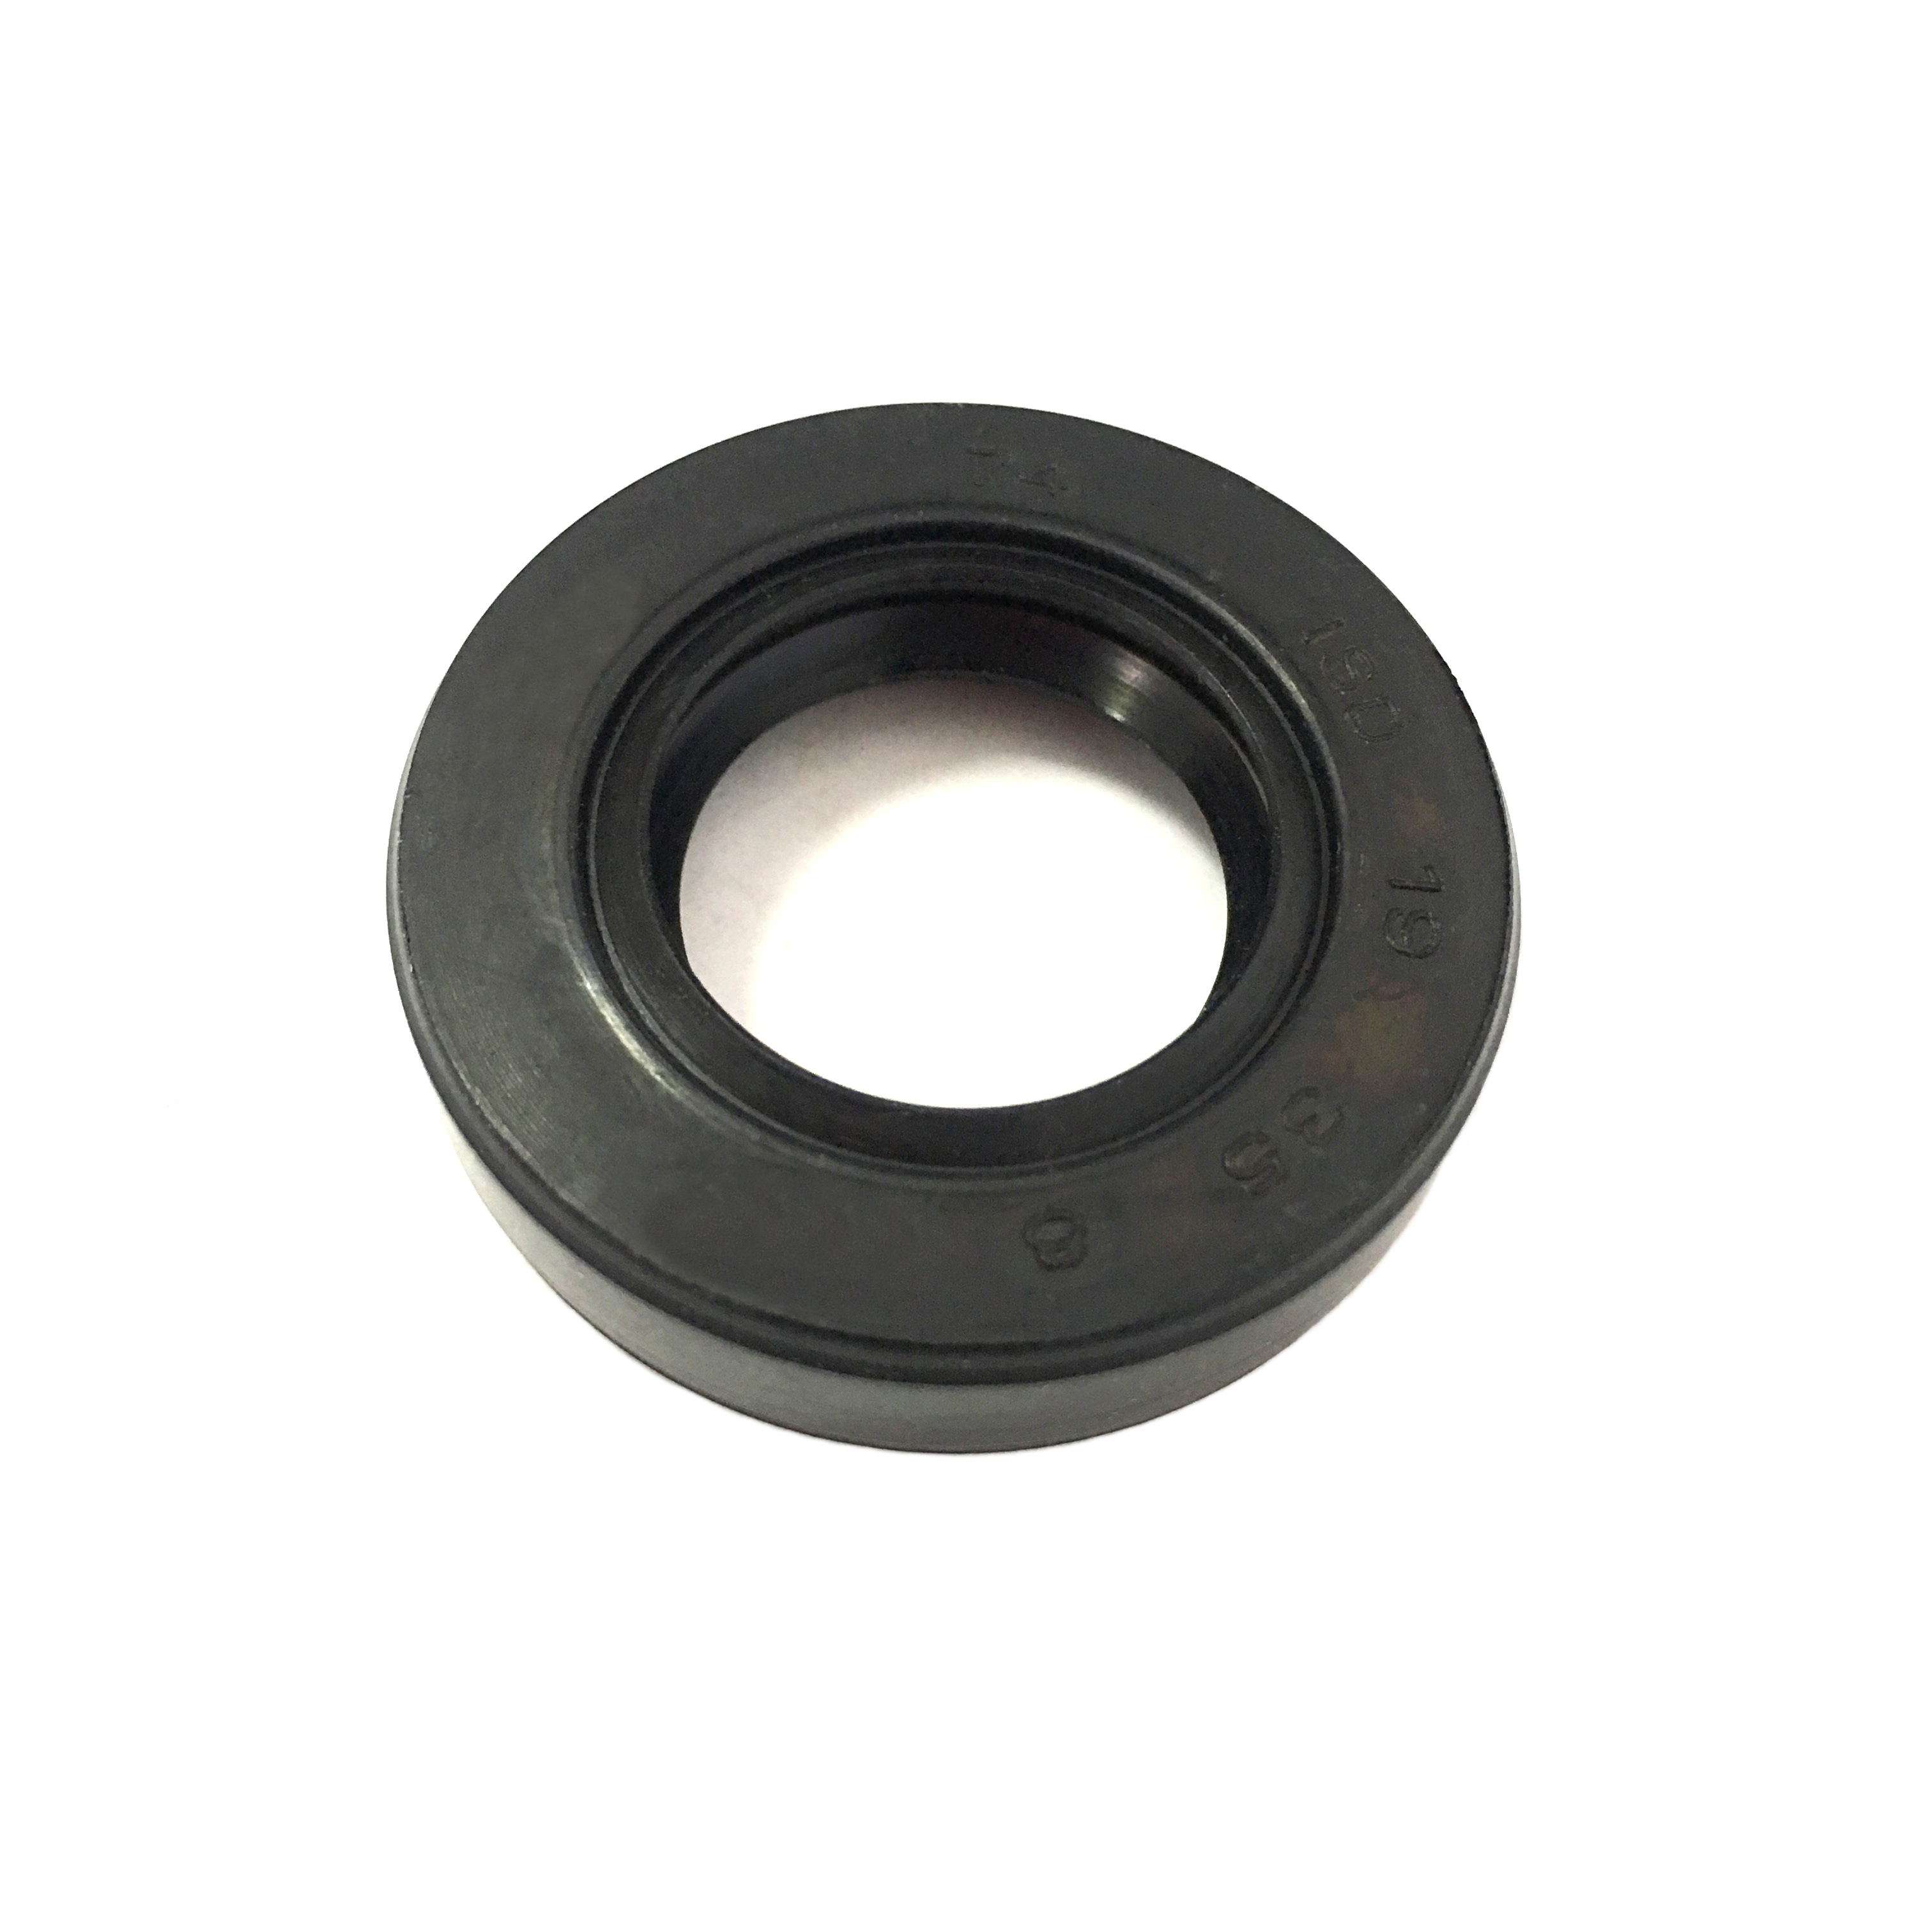 ISD Type Rubber Oil Seal 19*35*8